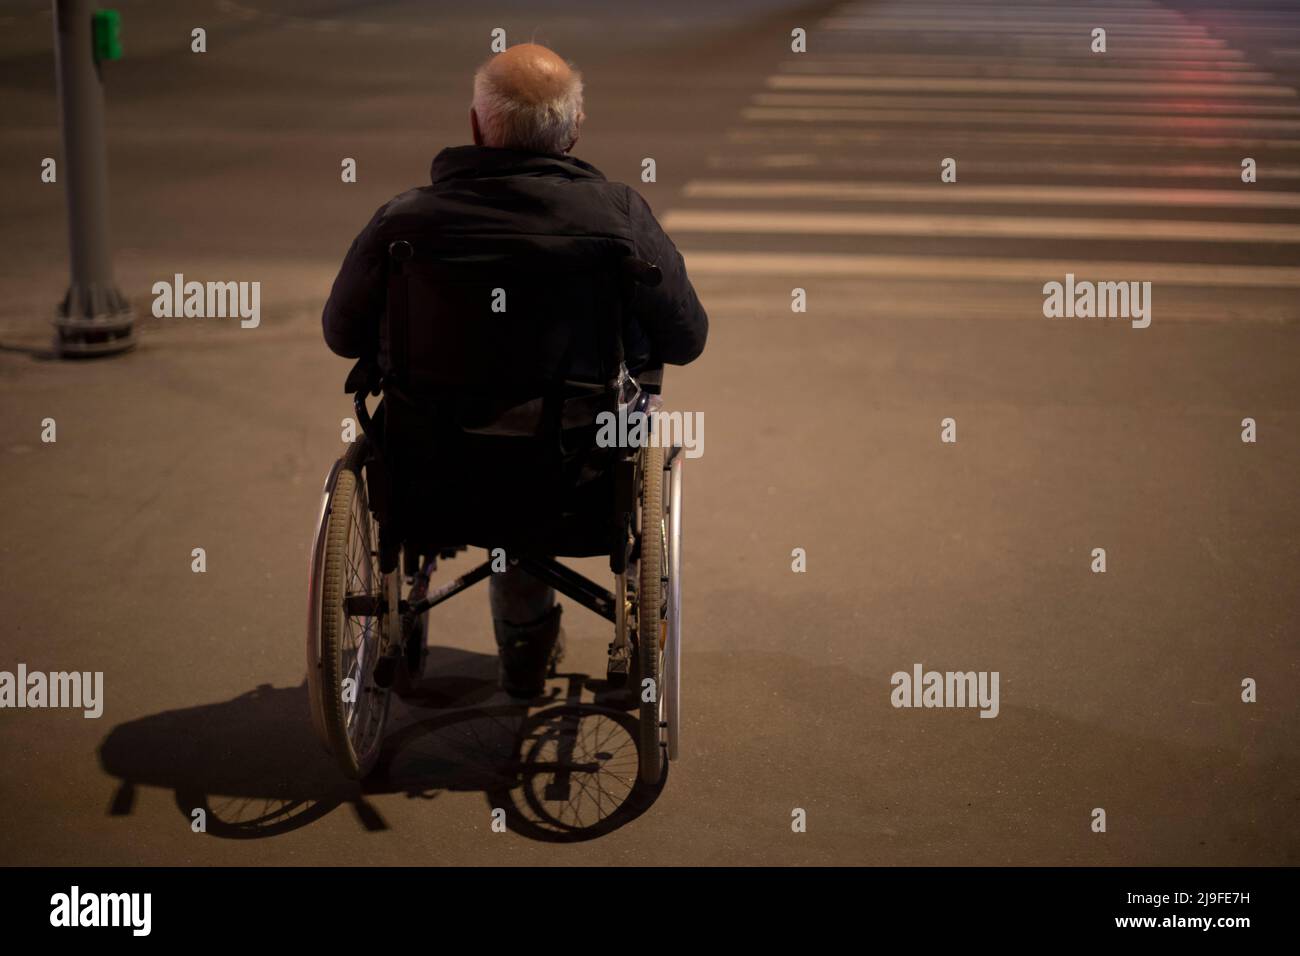 Wheelchair accessible at night. Man in wheelchair for disabled on road. Accessible environment in city. Person with disabilities. Medical chair. Stock Photo